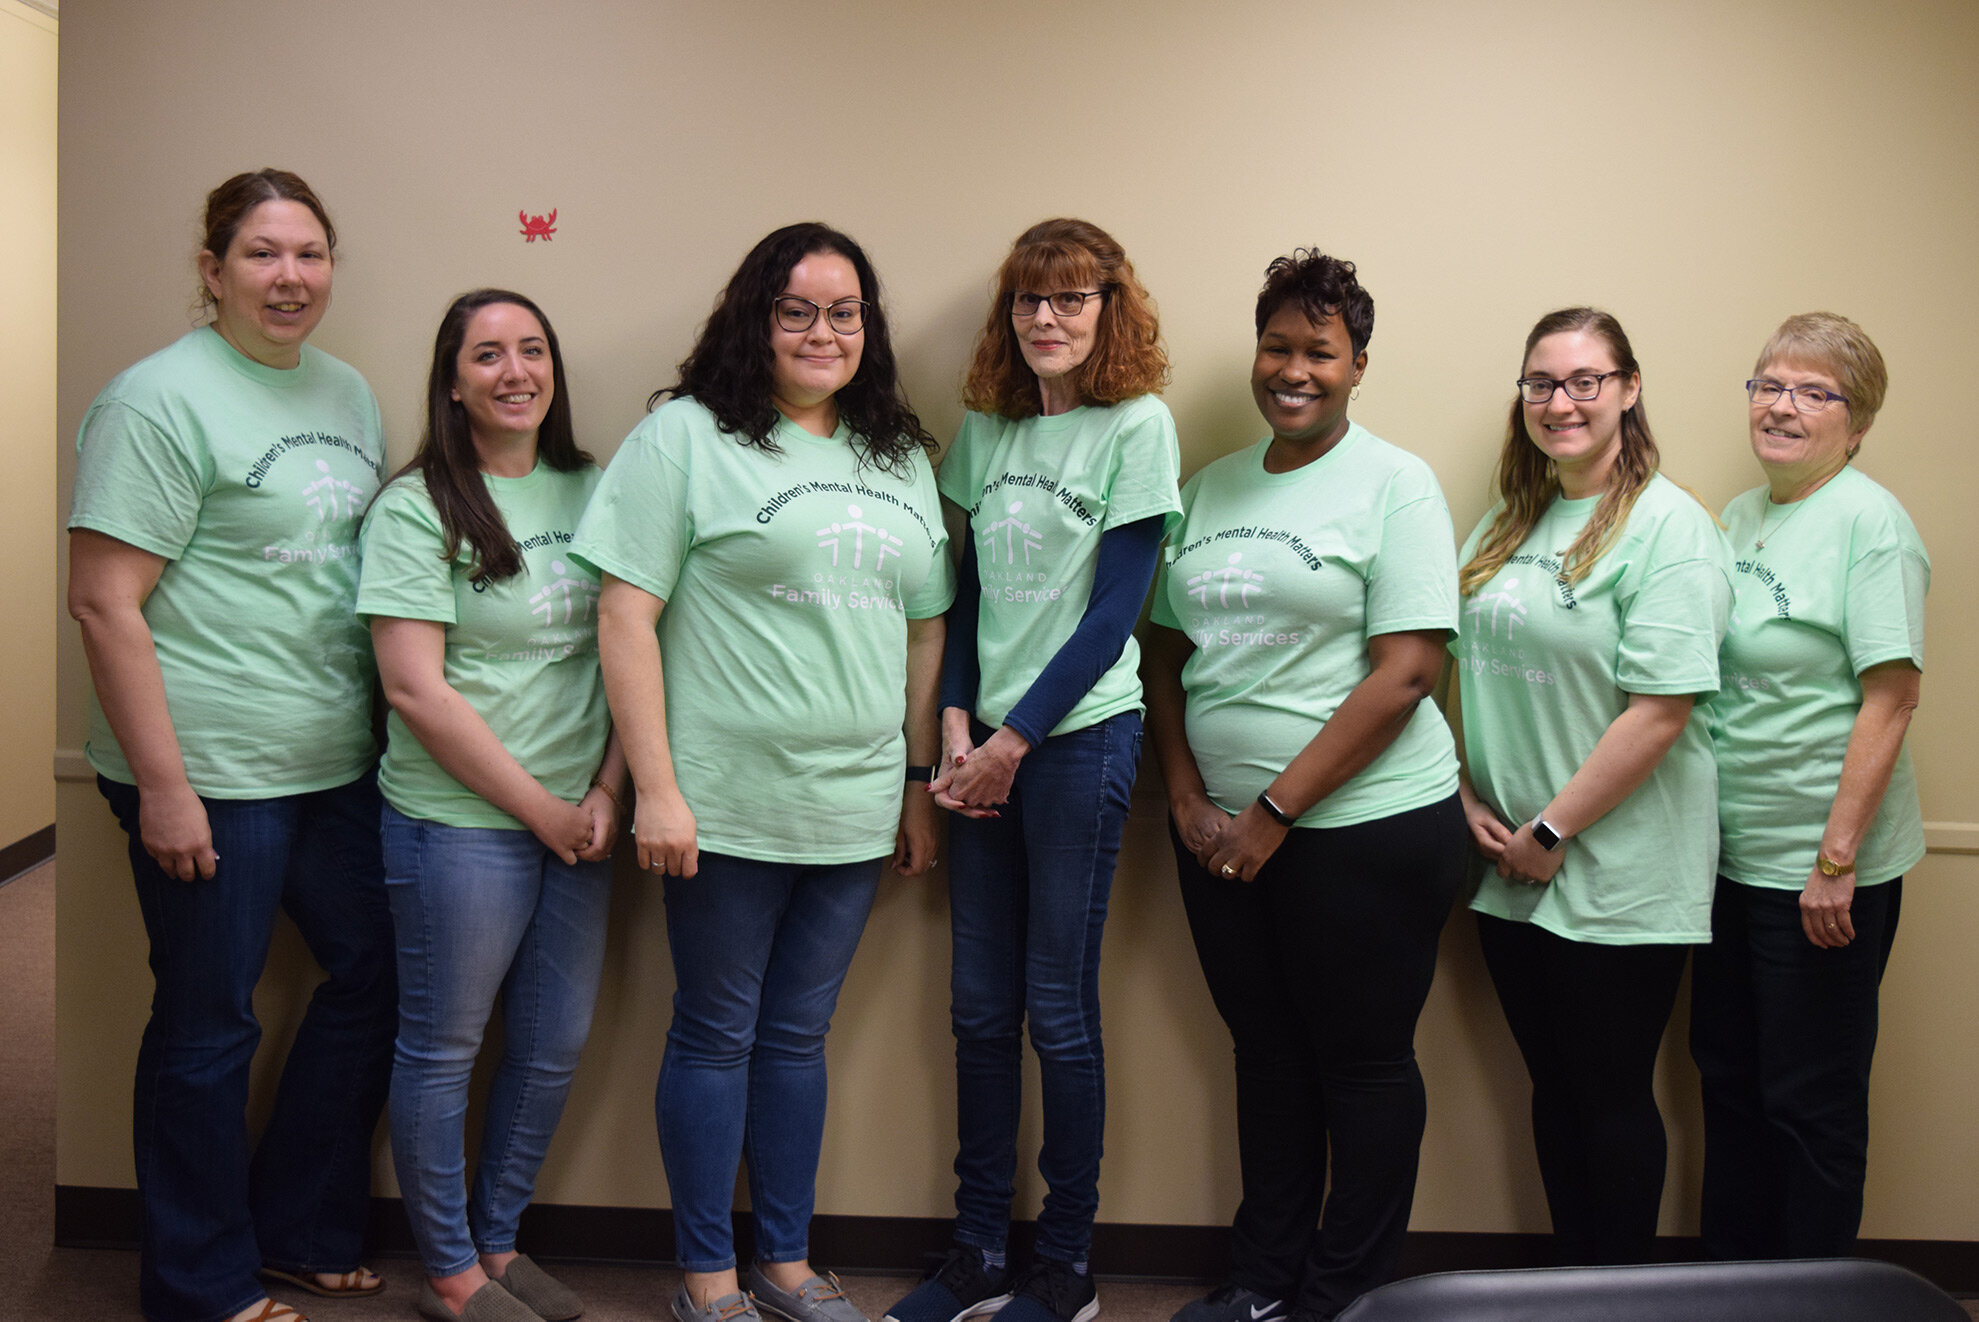  Staff celebrate Children’s Mental Health Awareness Day in 2019 at Oakland Family Services’ Walled Lake office. 